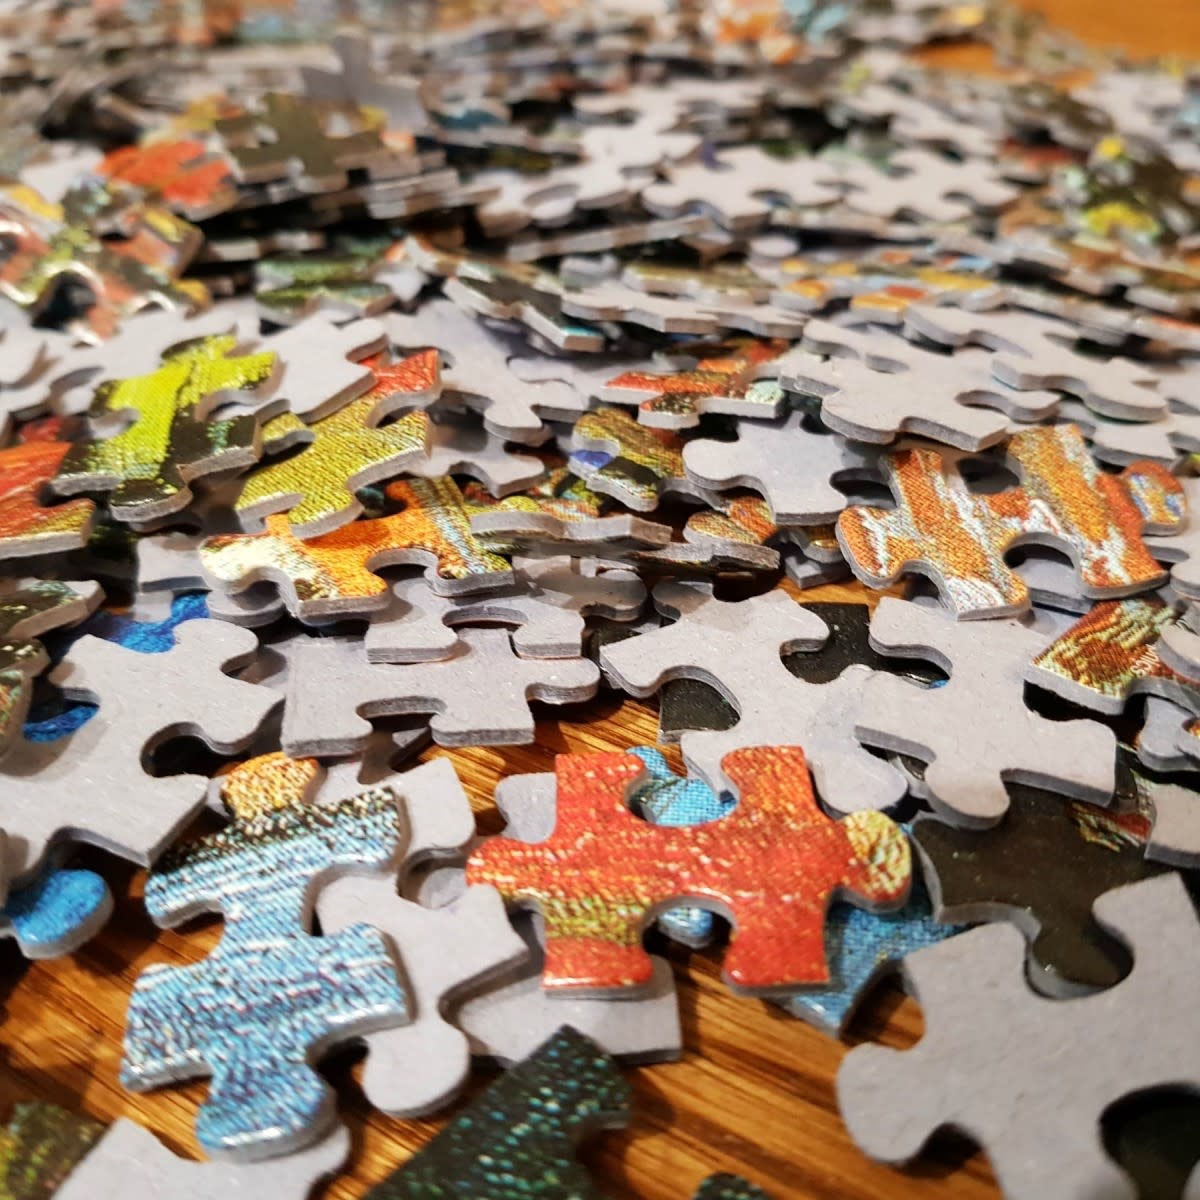 History of the Jigsaw Puzzle